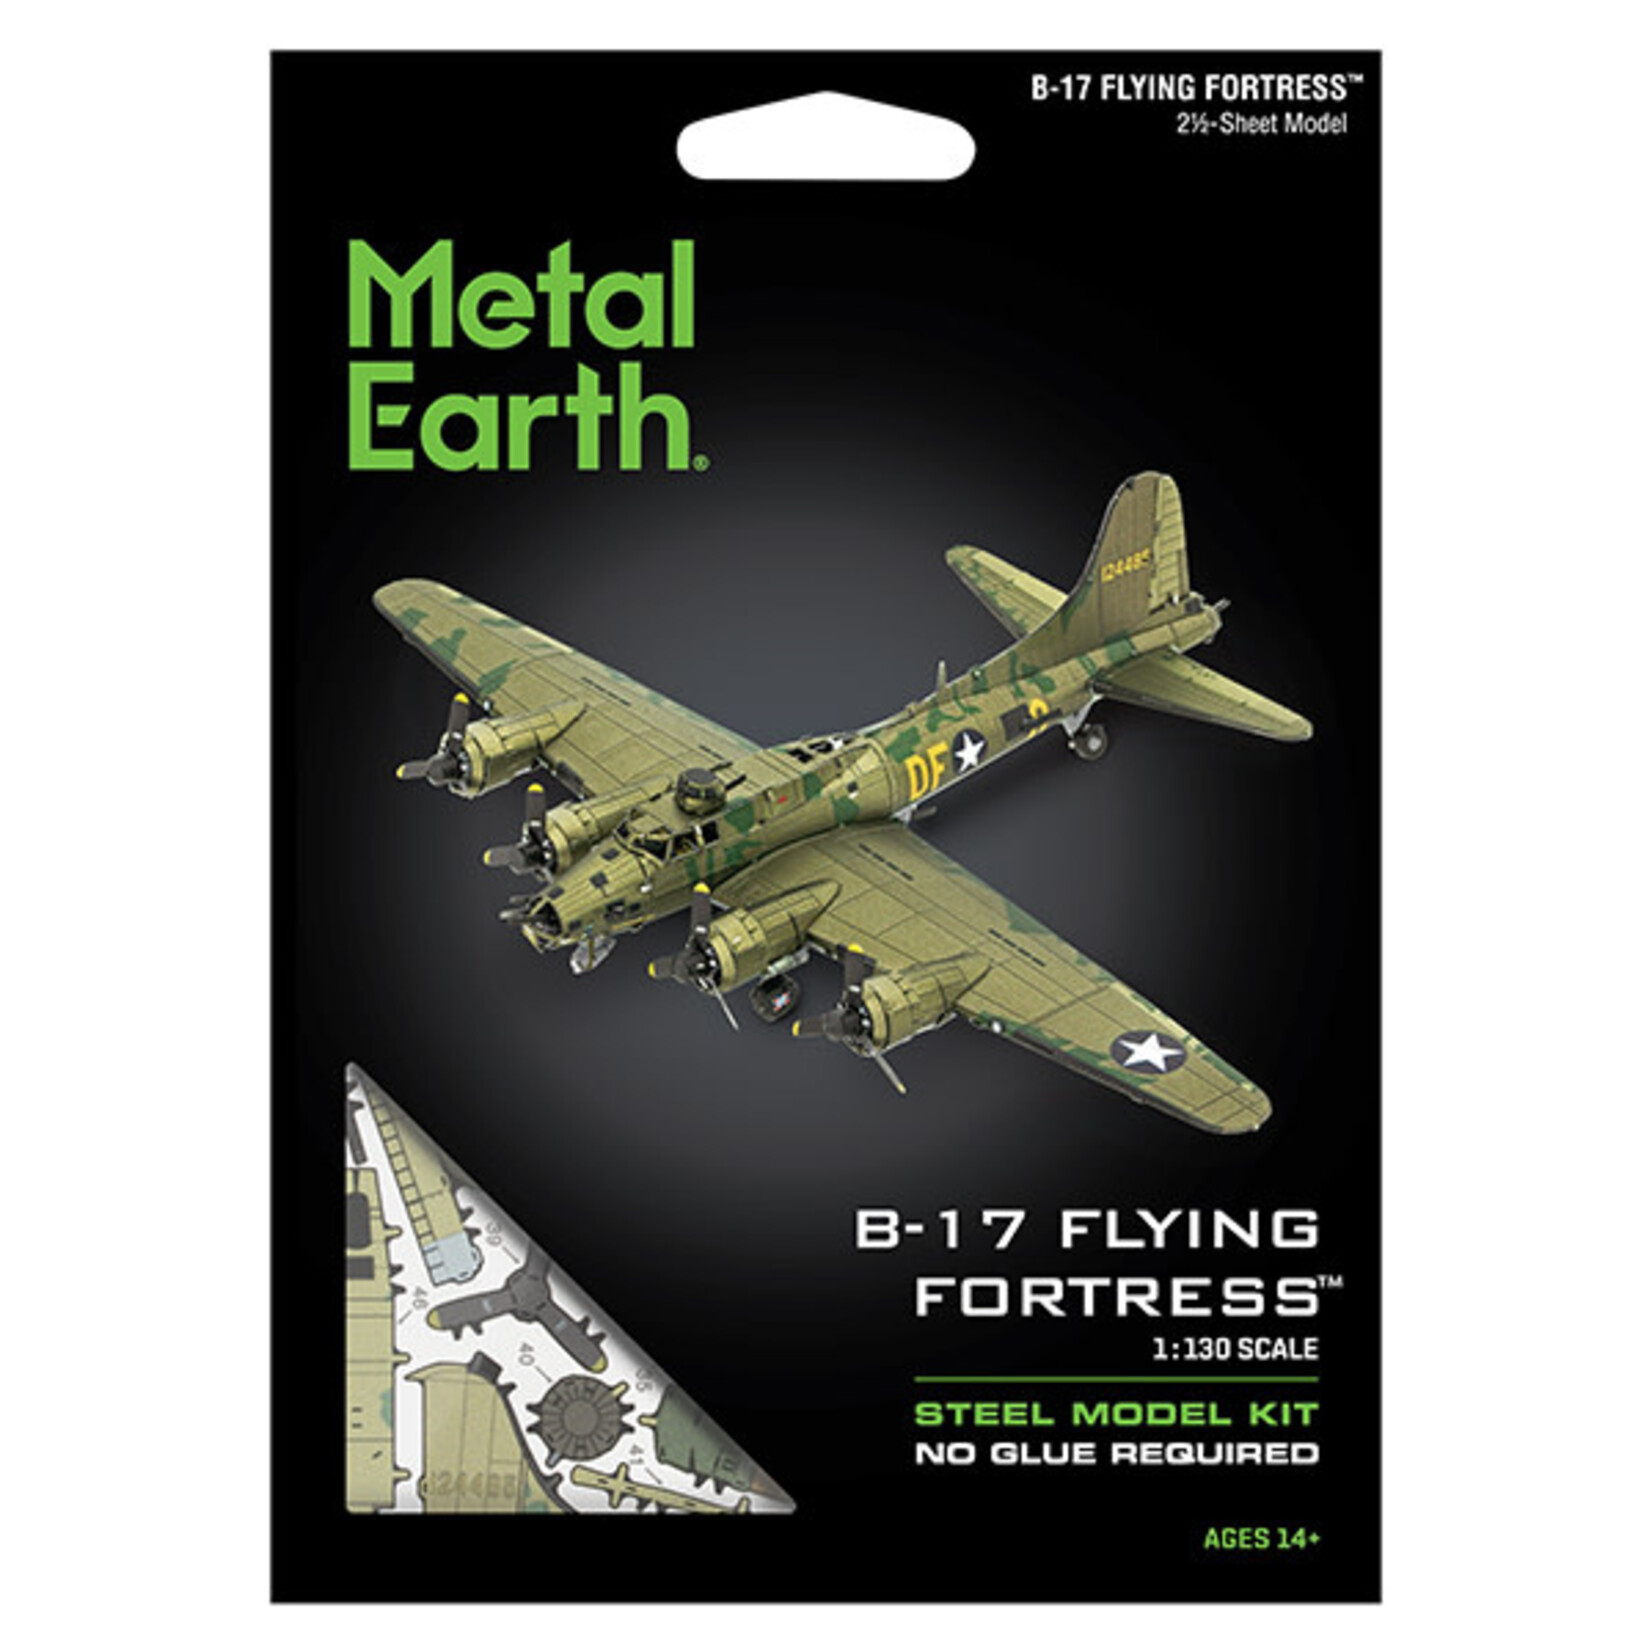 Metal Earth ME1009 B-17 Flying Fortress